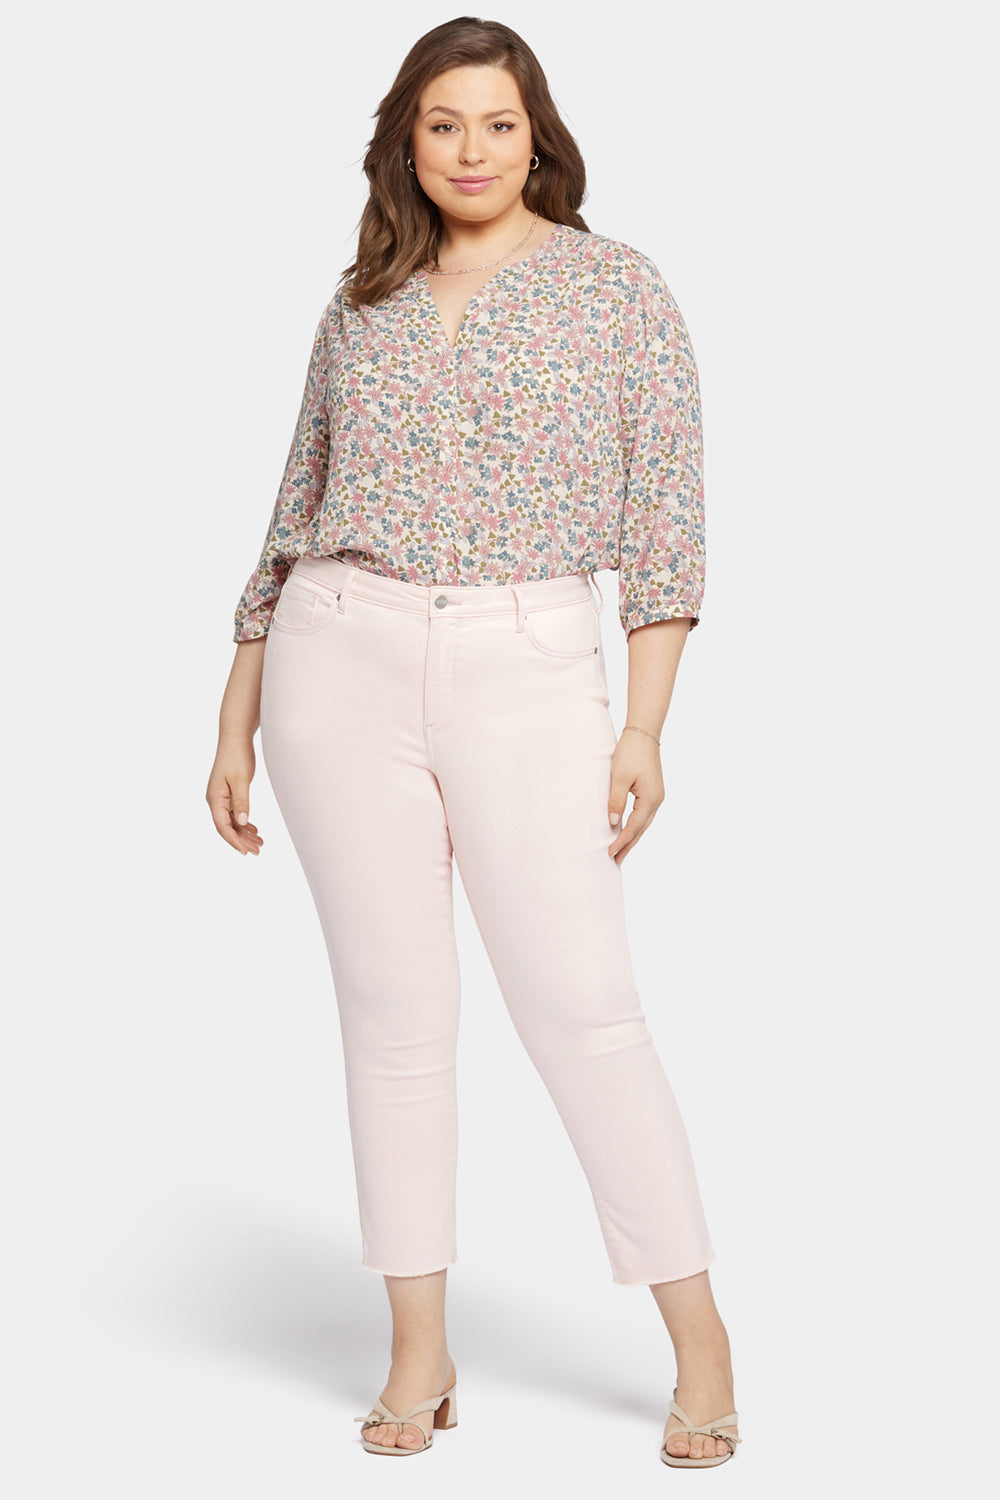 NYDJ Sheri Slim Ankle Jeans In Plus Size With Frayed Hems - Carnation